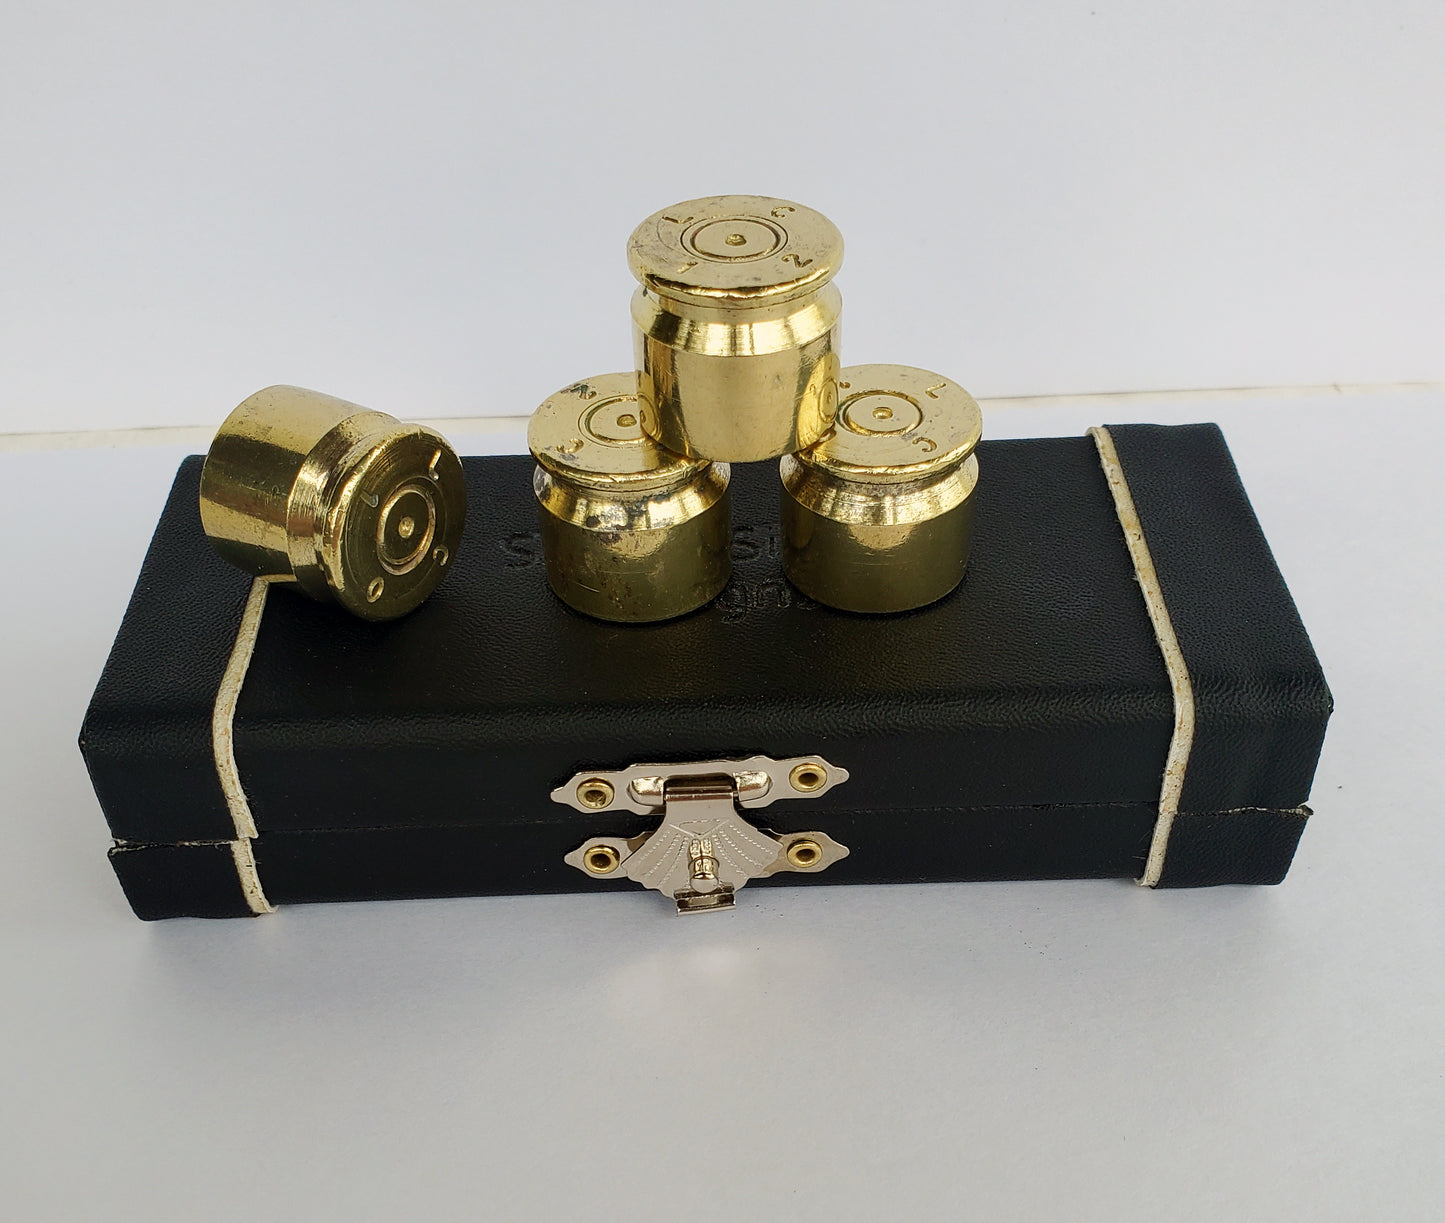 50 Caliber BMG Brass Guitar Knobs on top of case